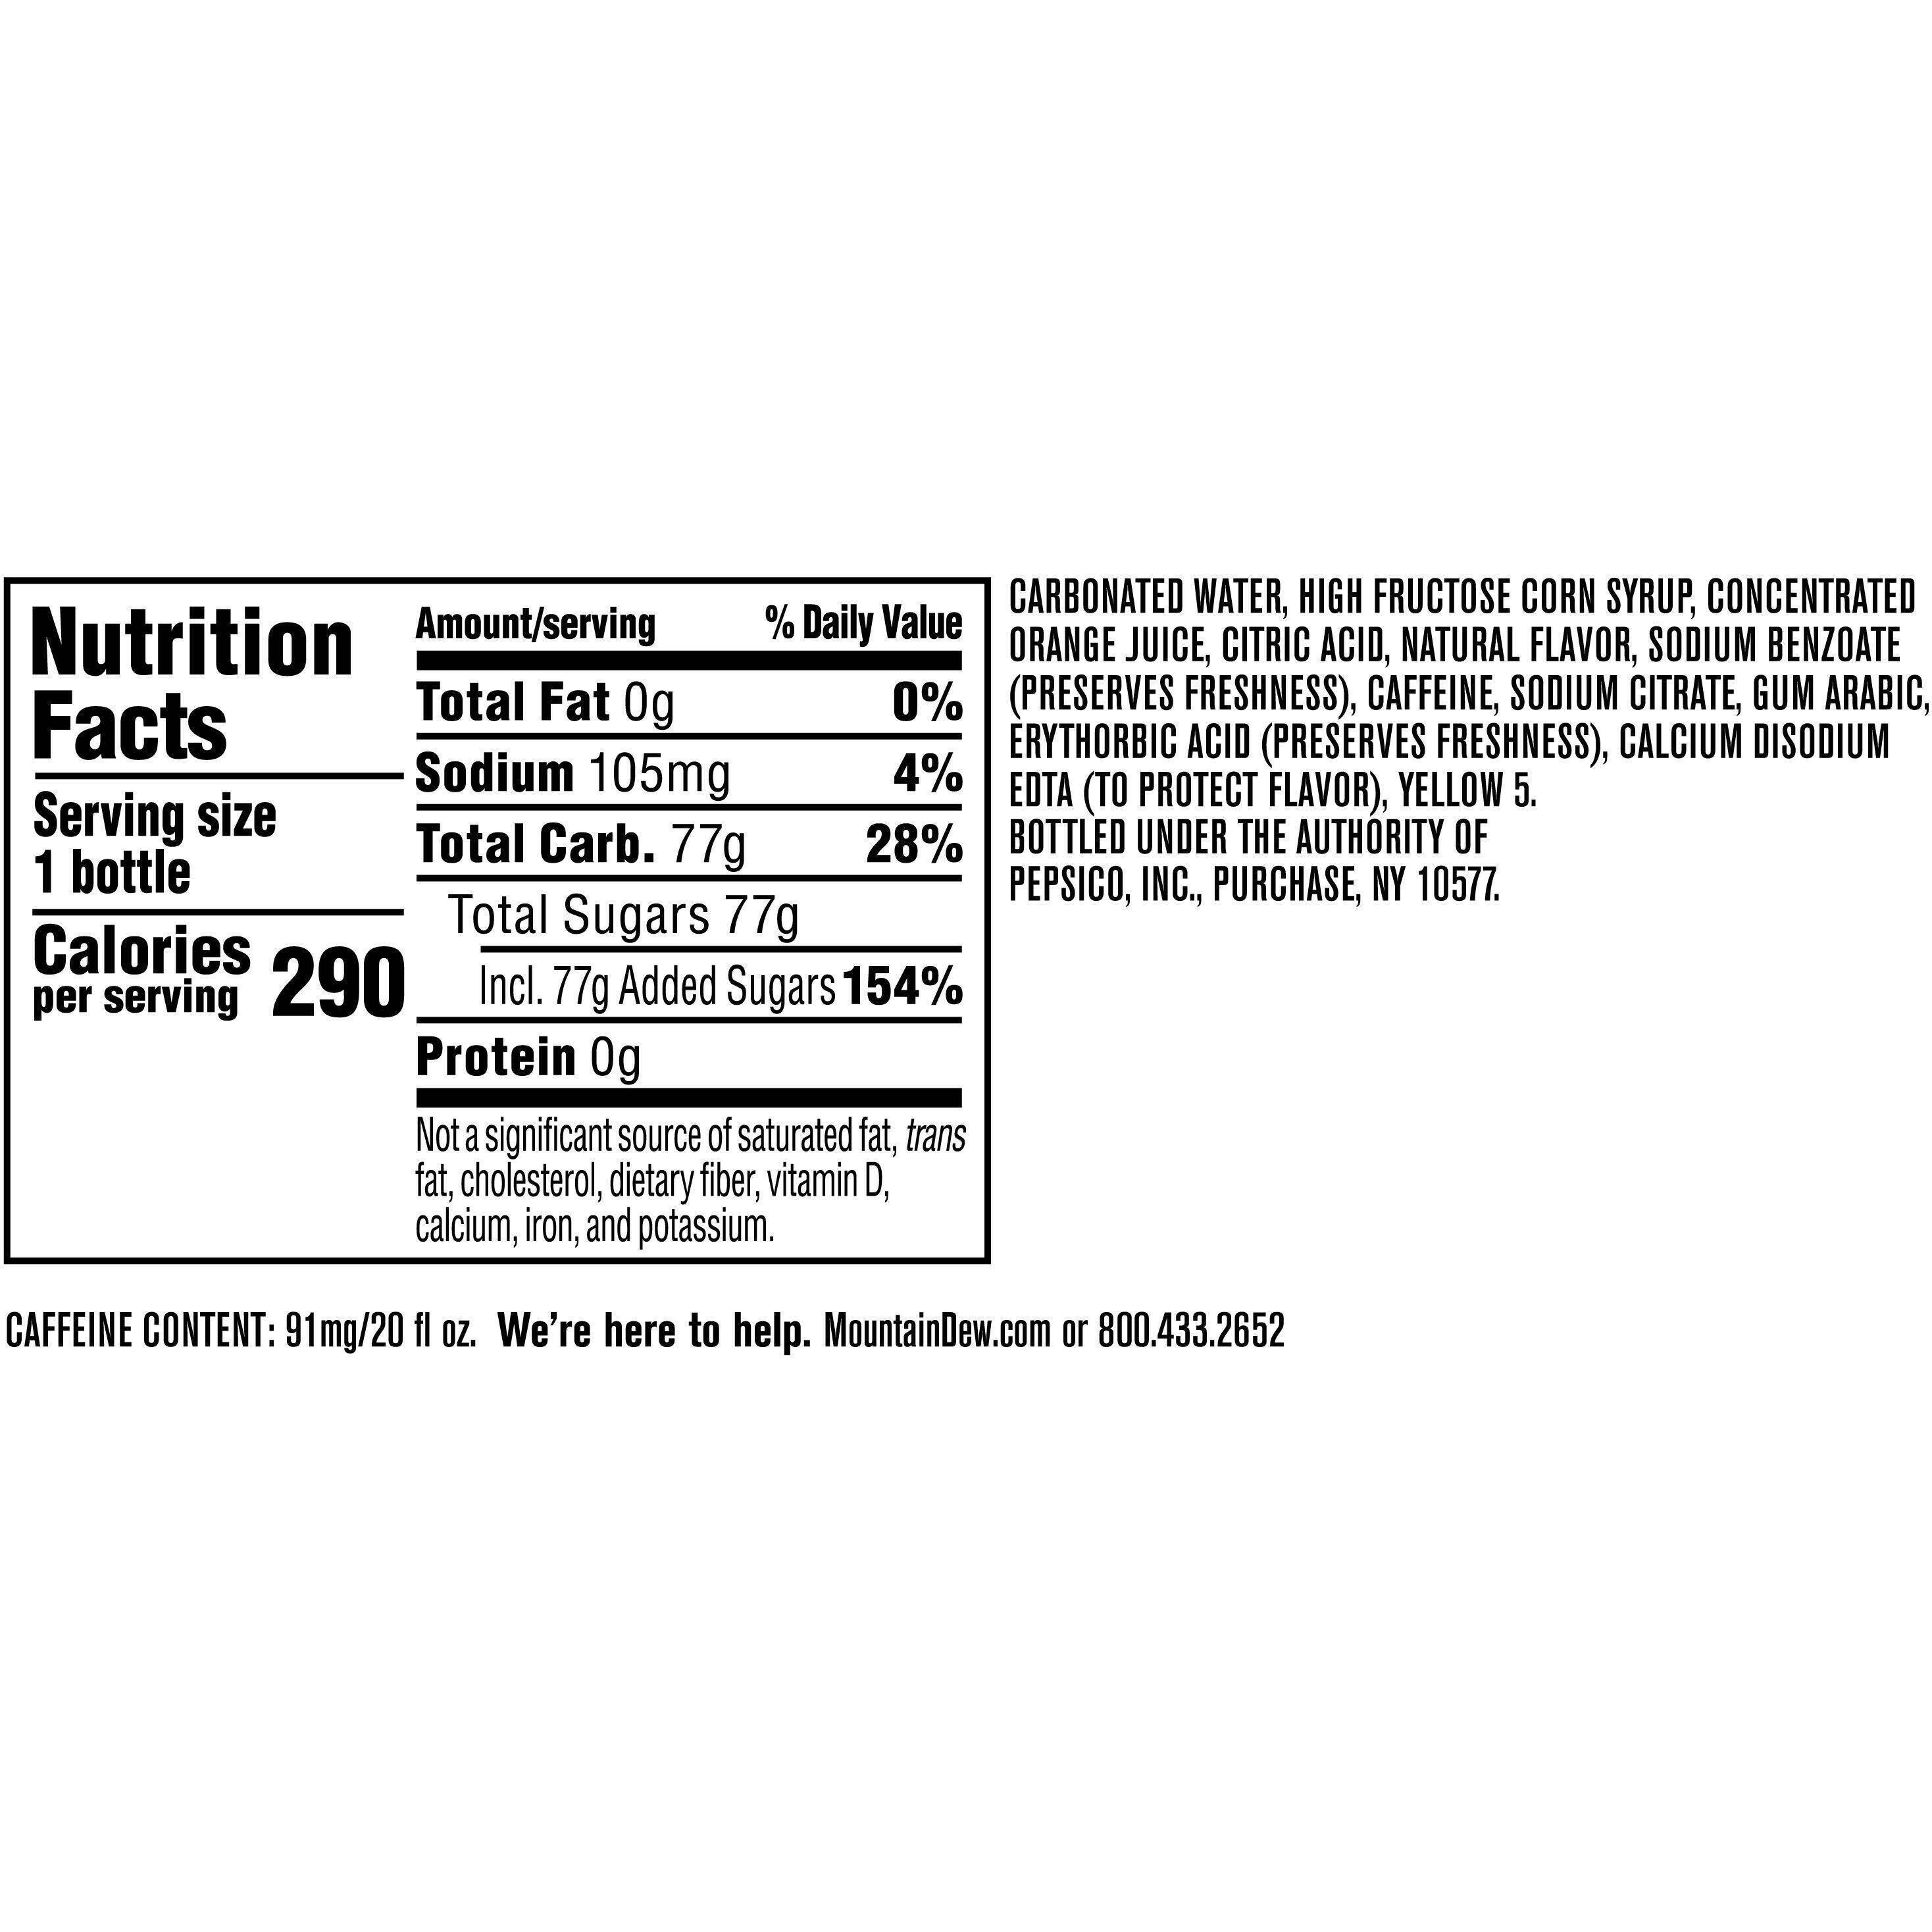 Image describing nutrition information for product Mtn Dew